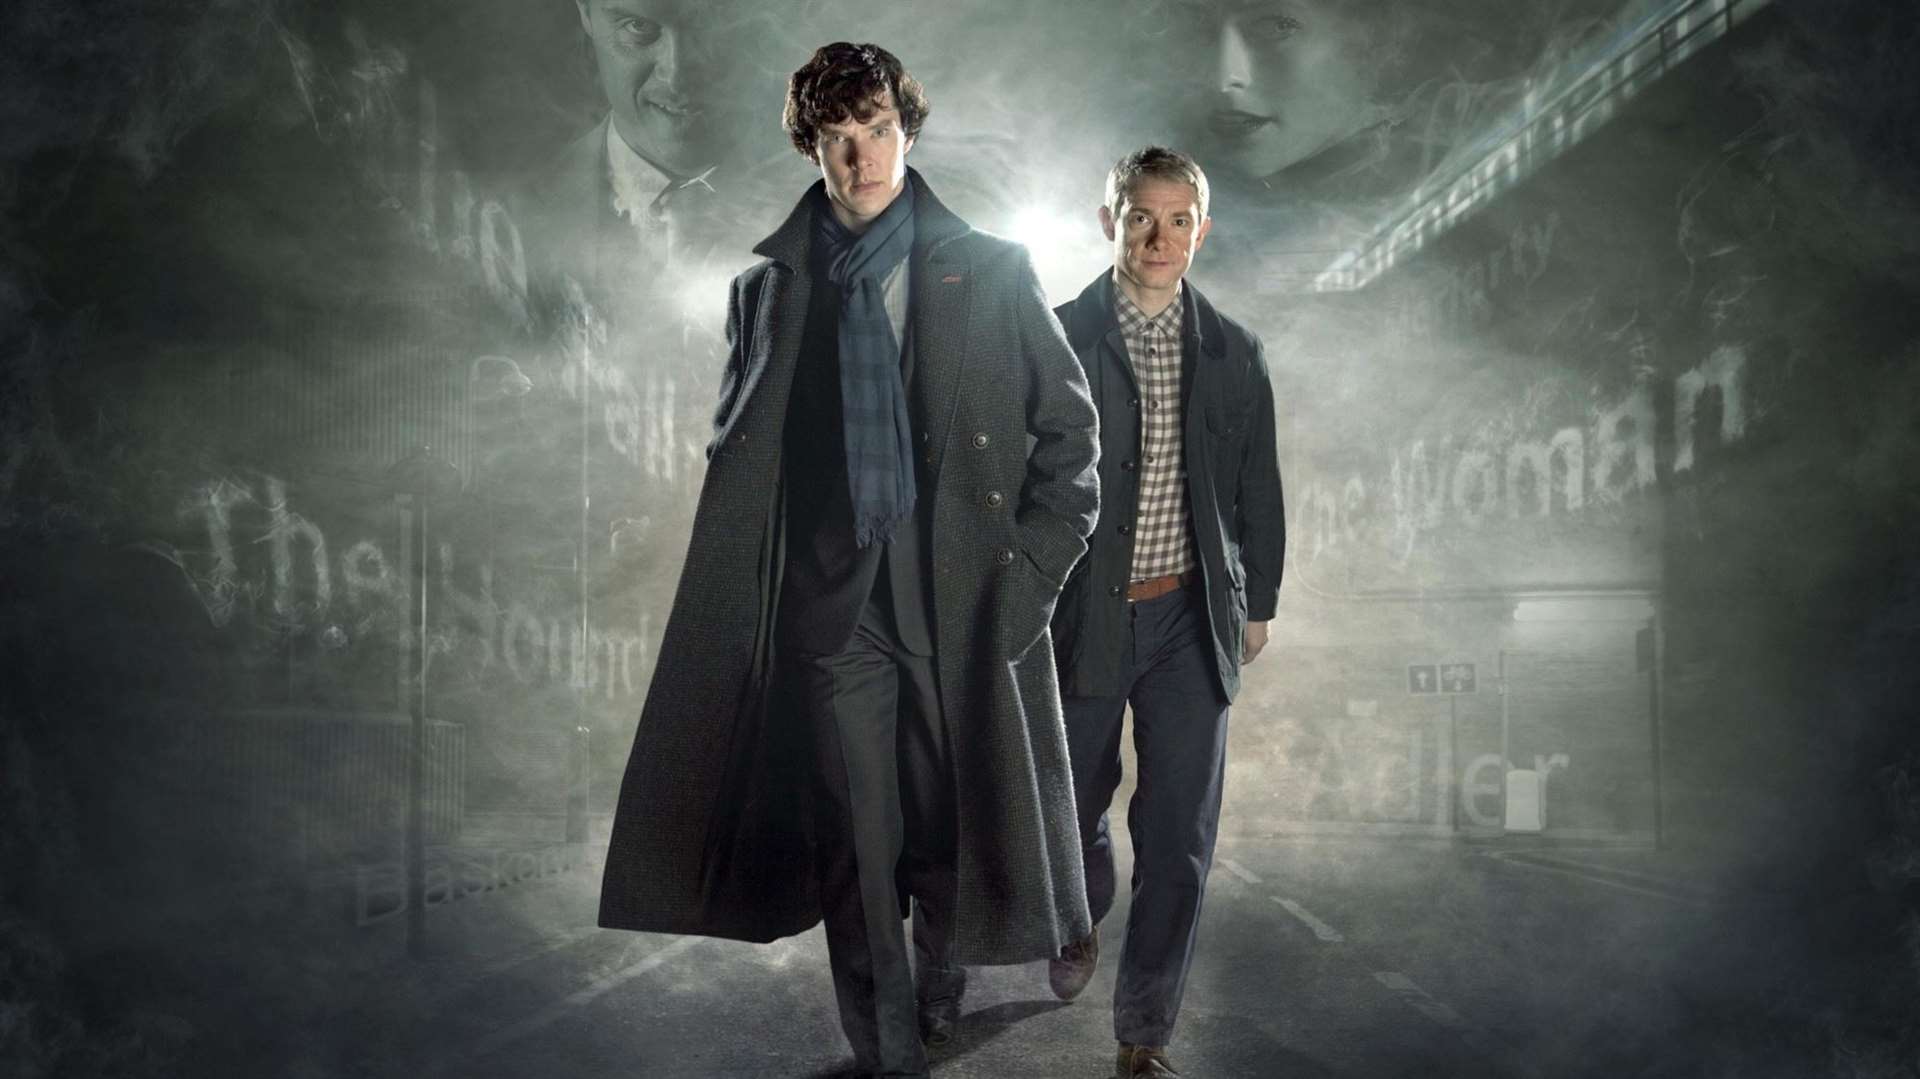 Sherlock: The Official Outdoor Game offers the chance to step into Benedict Cumberbatch's shoes